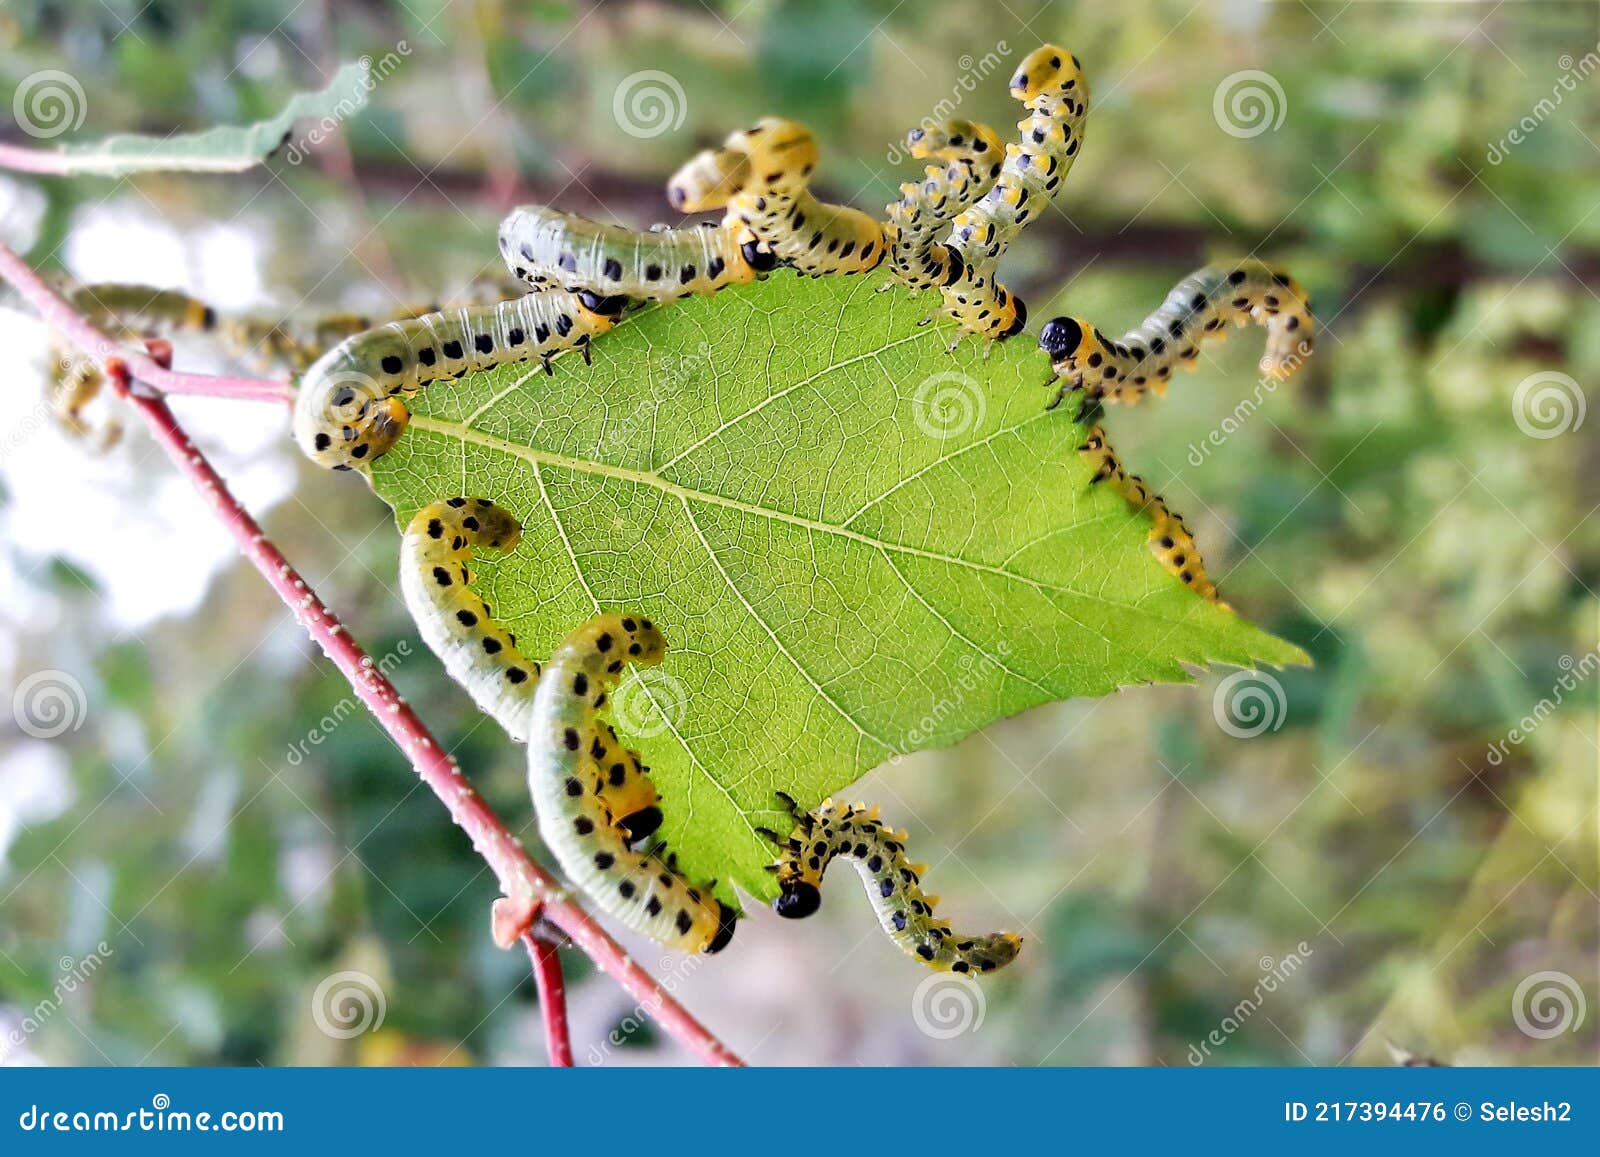 The Caterpillars Eat Birch Leaves Gluttony Insects In Nature Pests In The Natural Environment